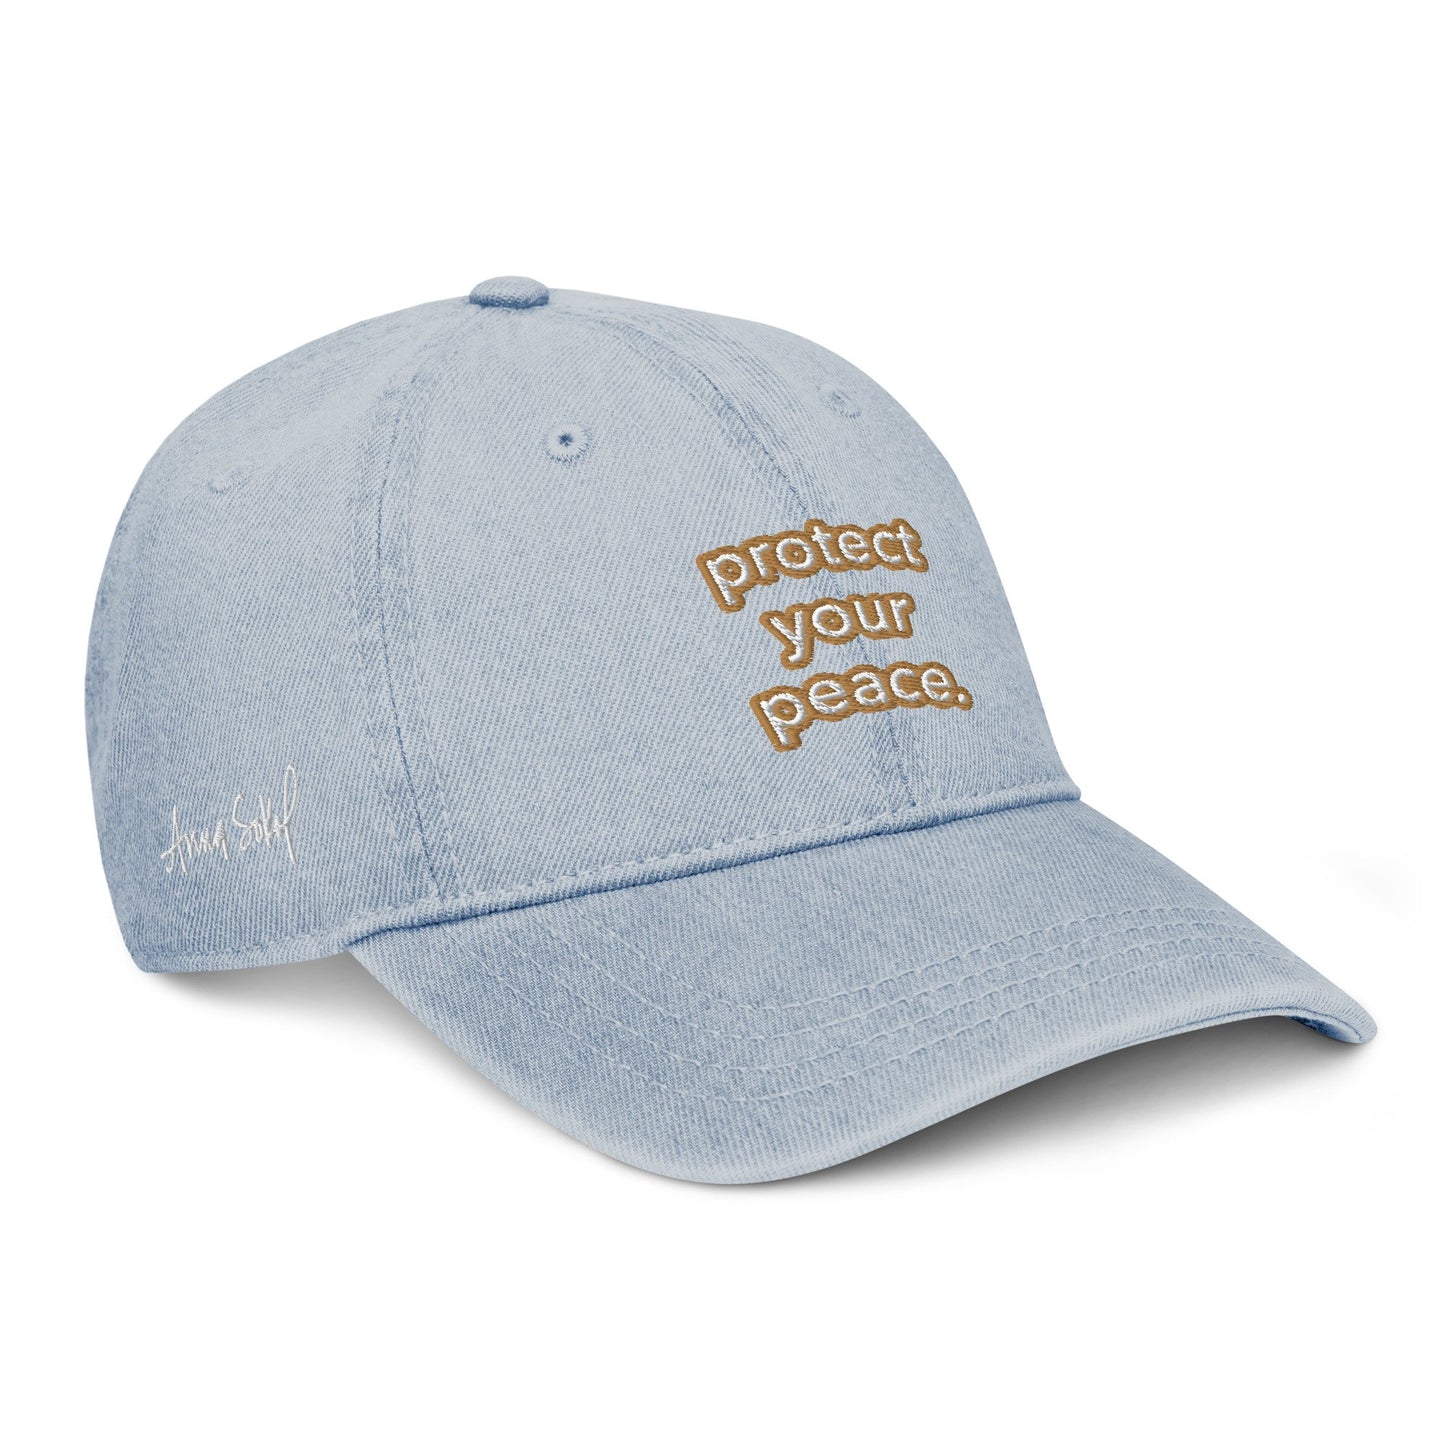 Protect Your Peace - Denim Hat